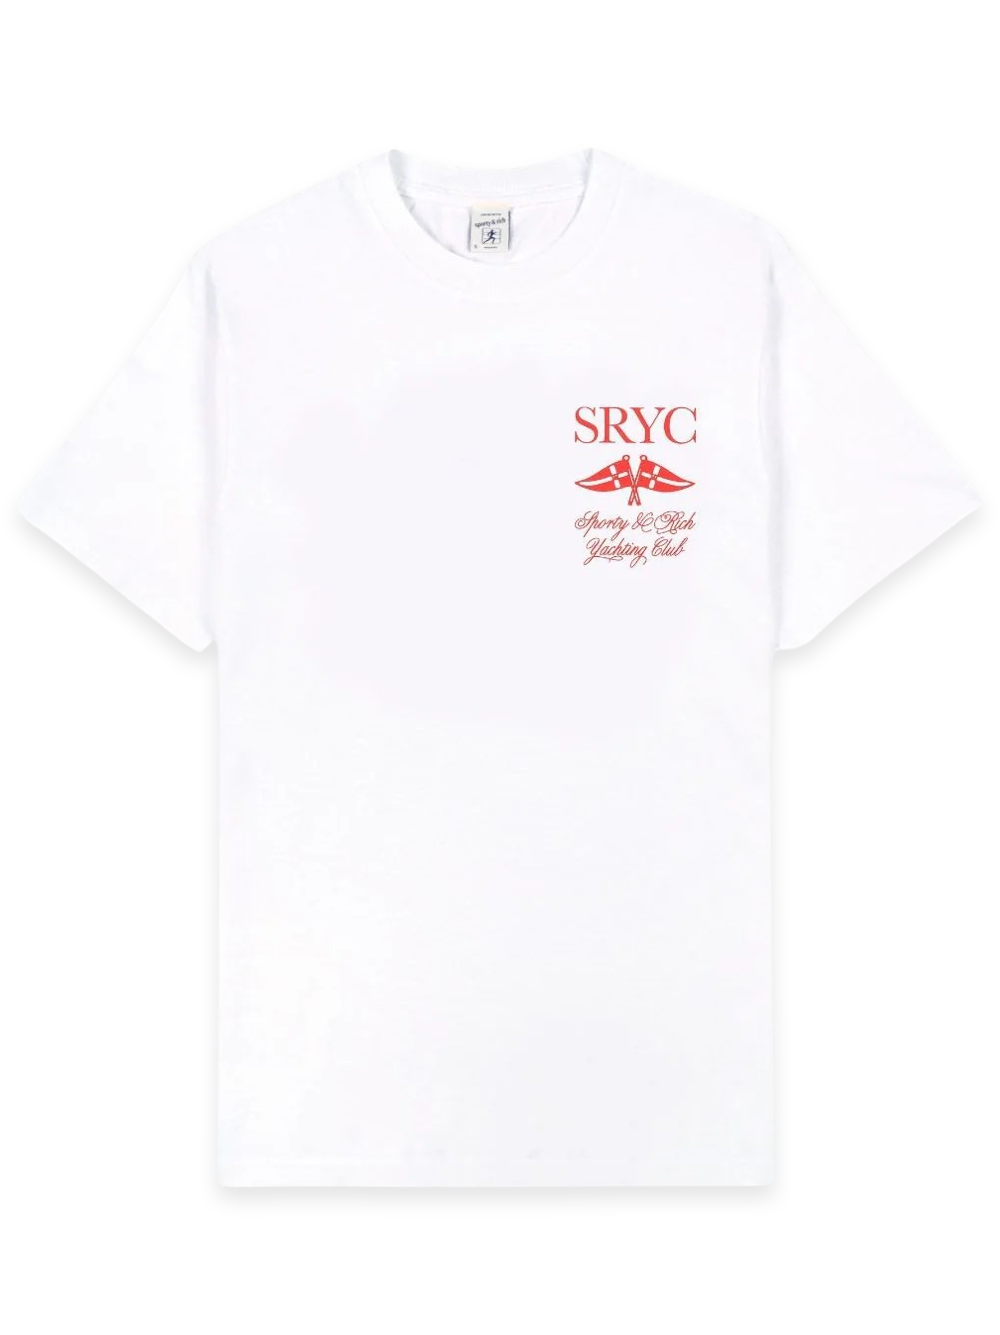 Sporty & Rich Yacht Club T-Shirt in White/Cerise